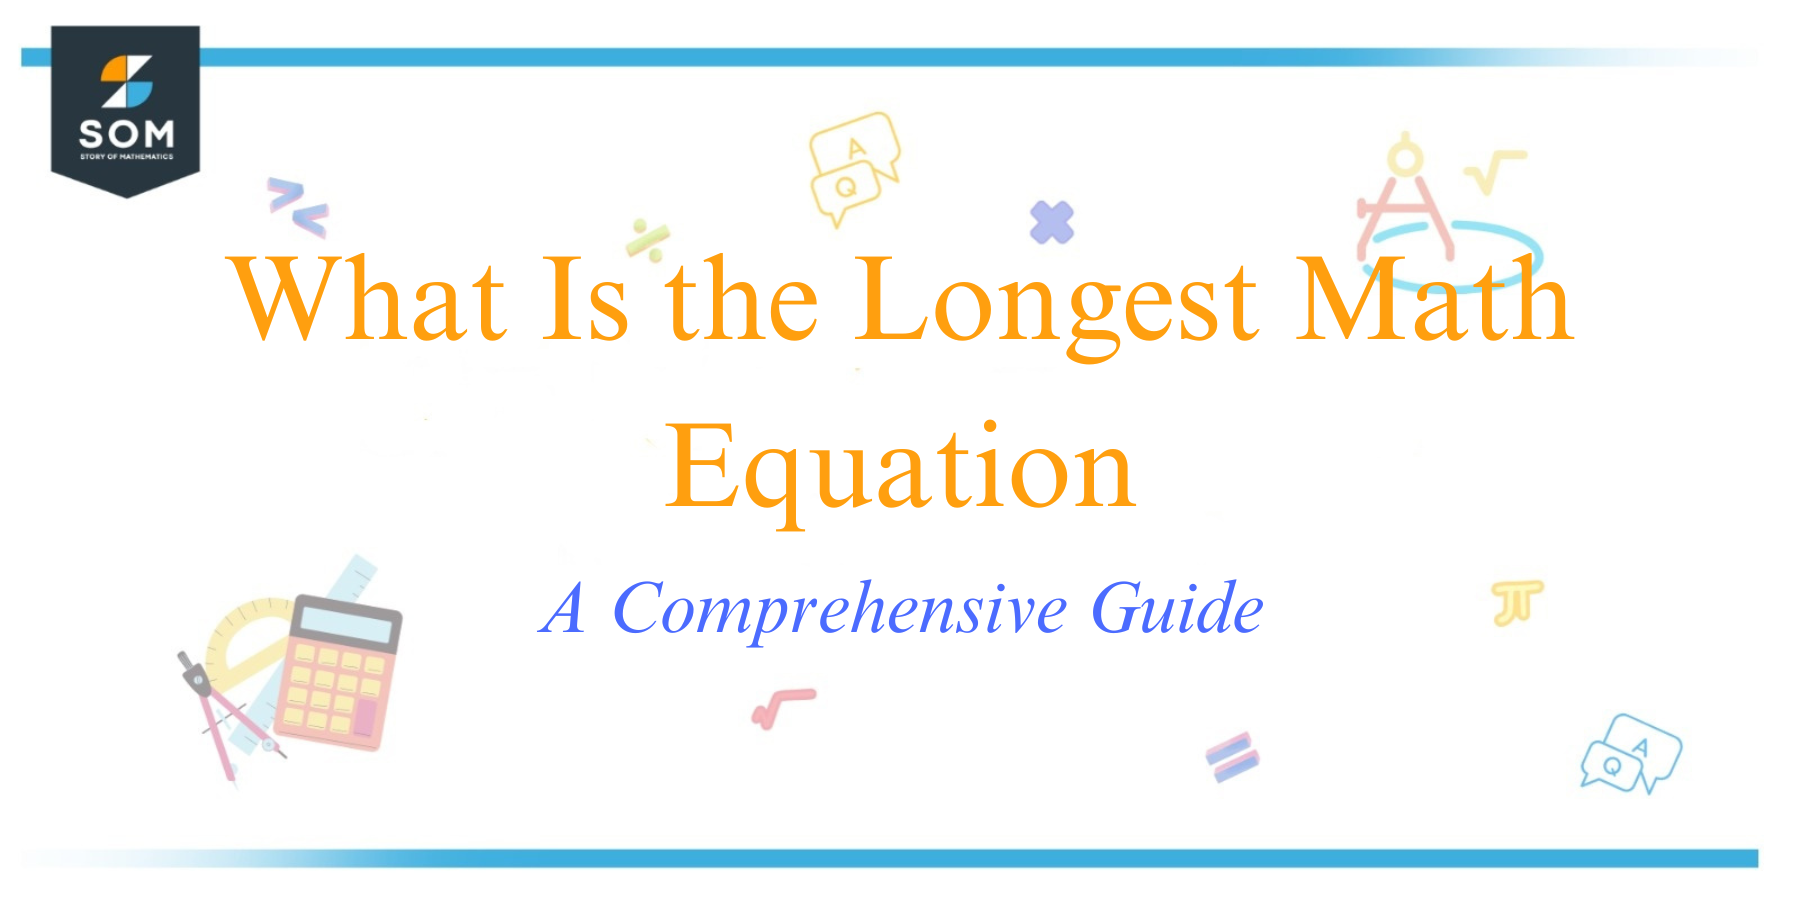 What Is the Longest Math Equation A Comprehensive Guide